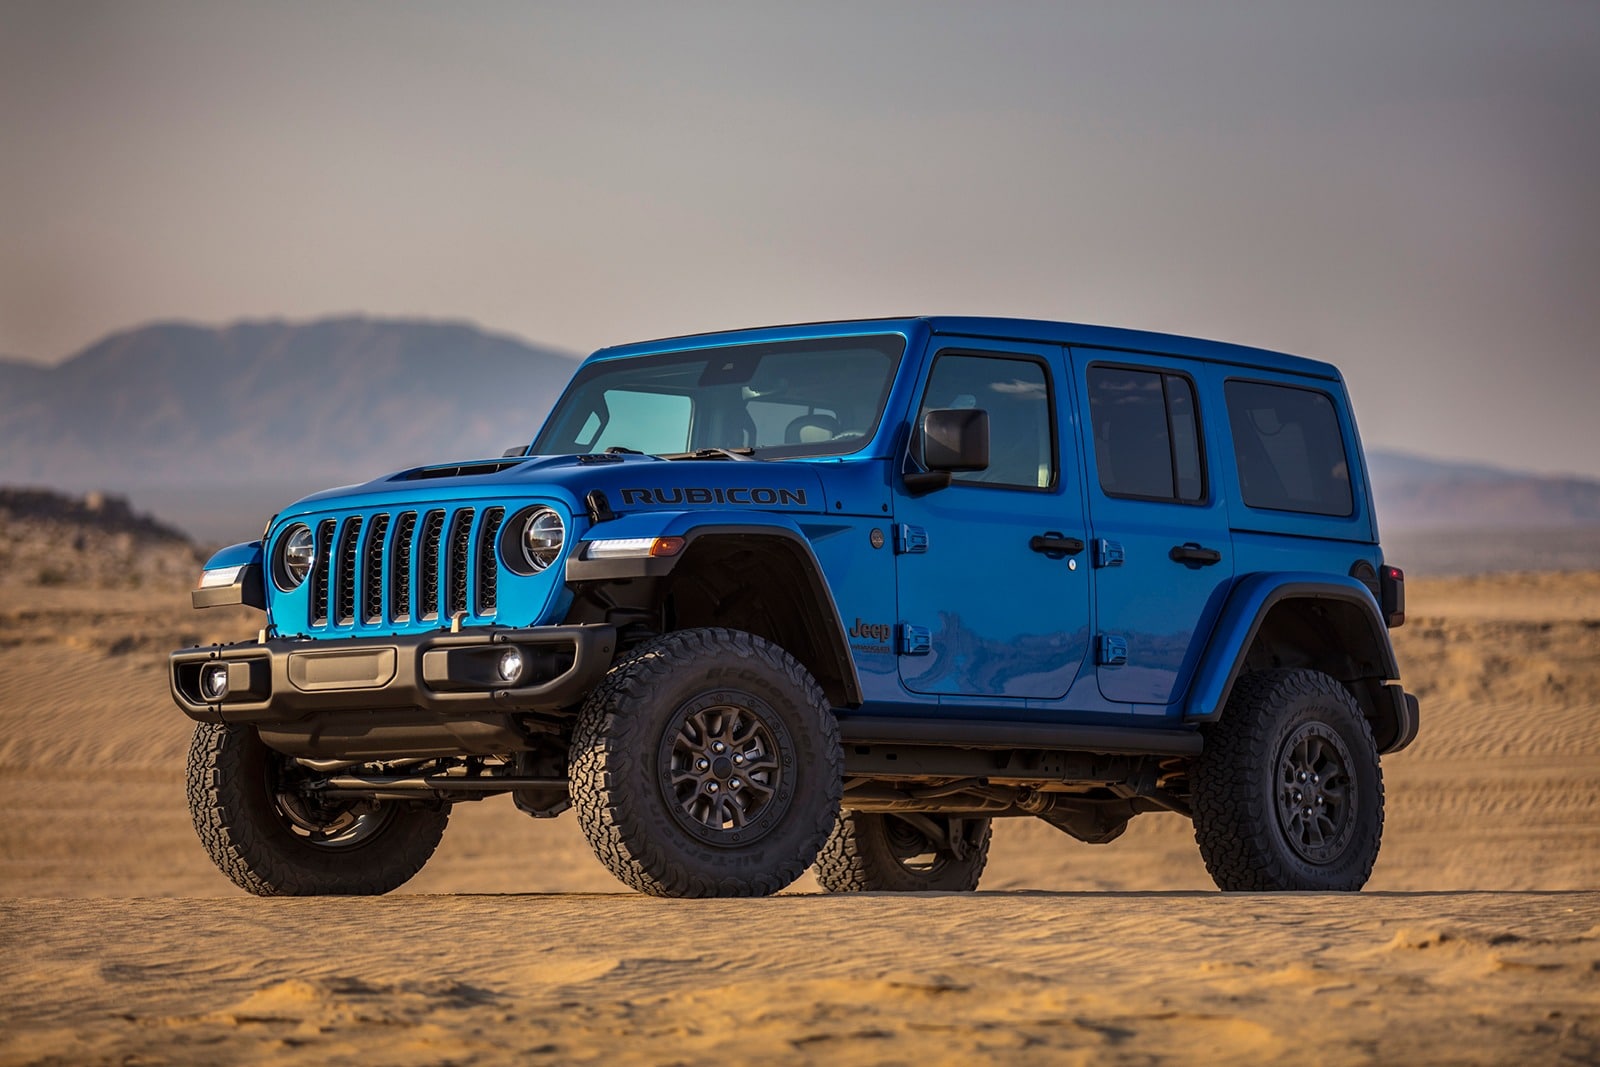 The 2021 Jeep Wrangler Rubicon 392 Is Very Expensive and Probably Very Fun